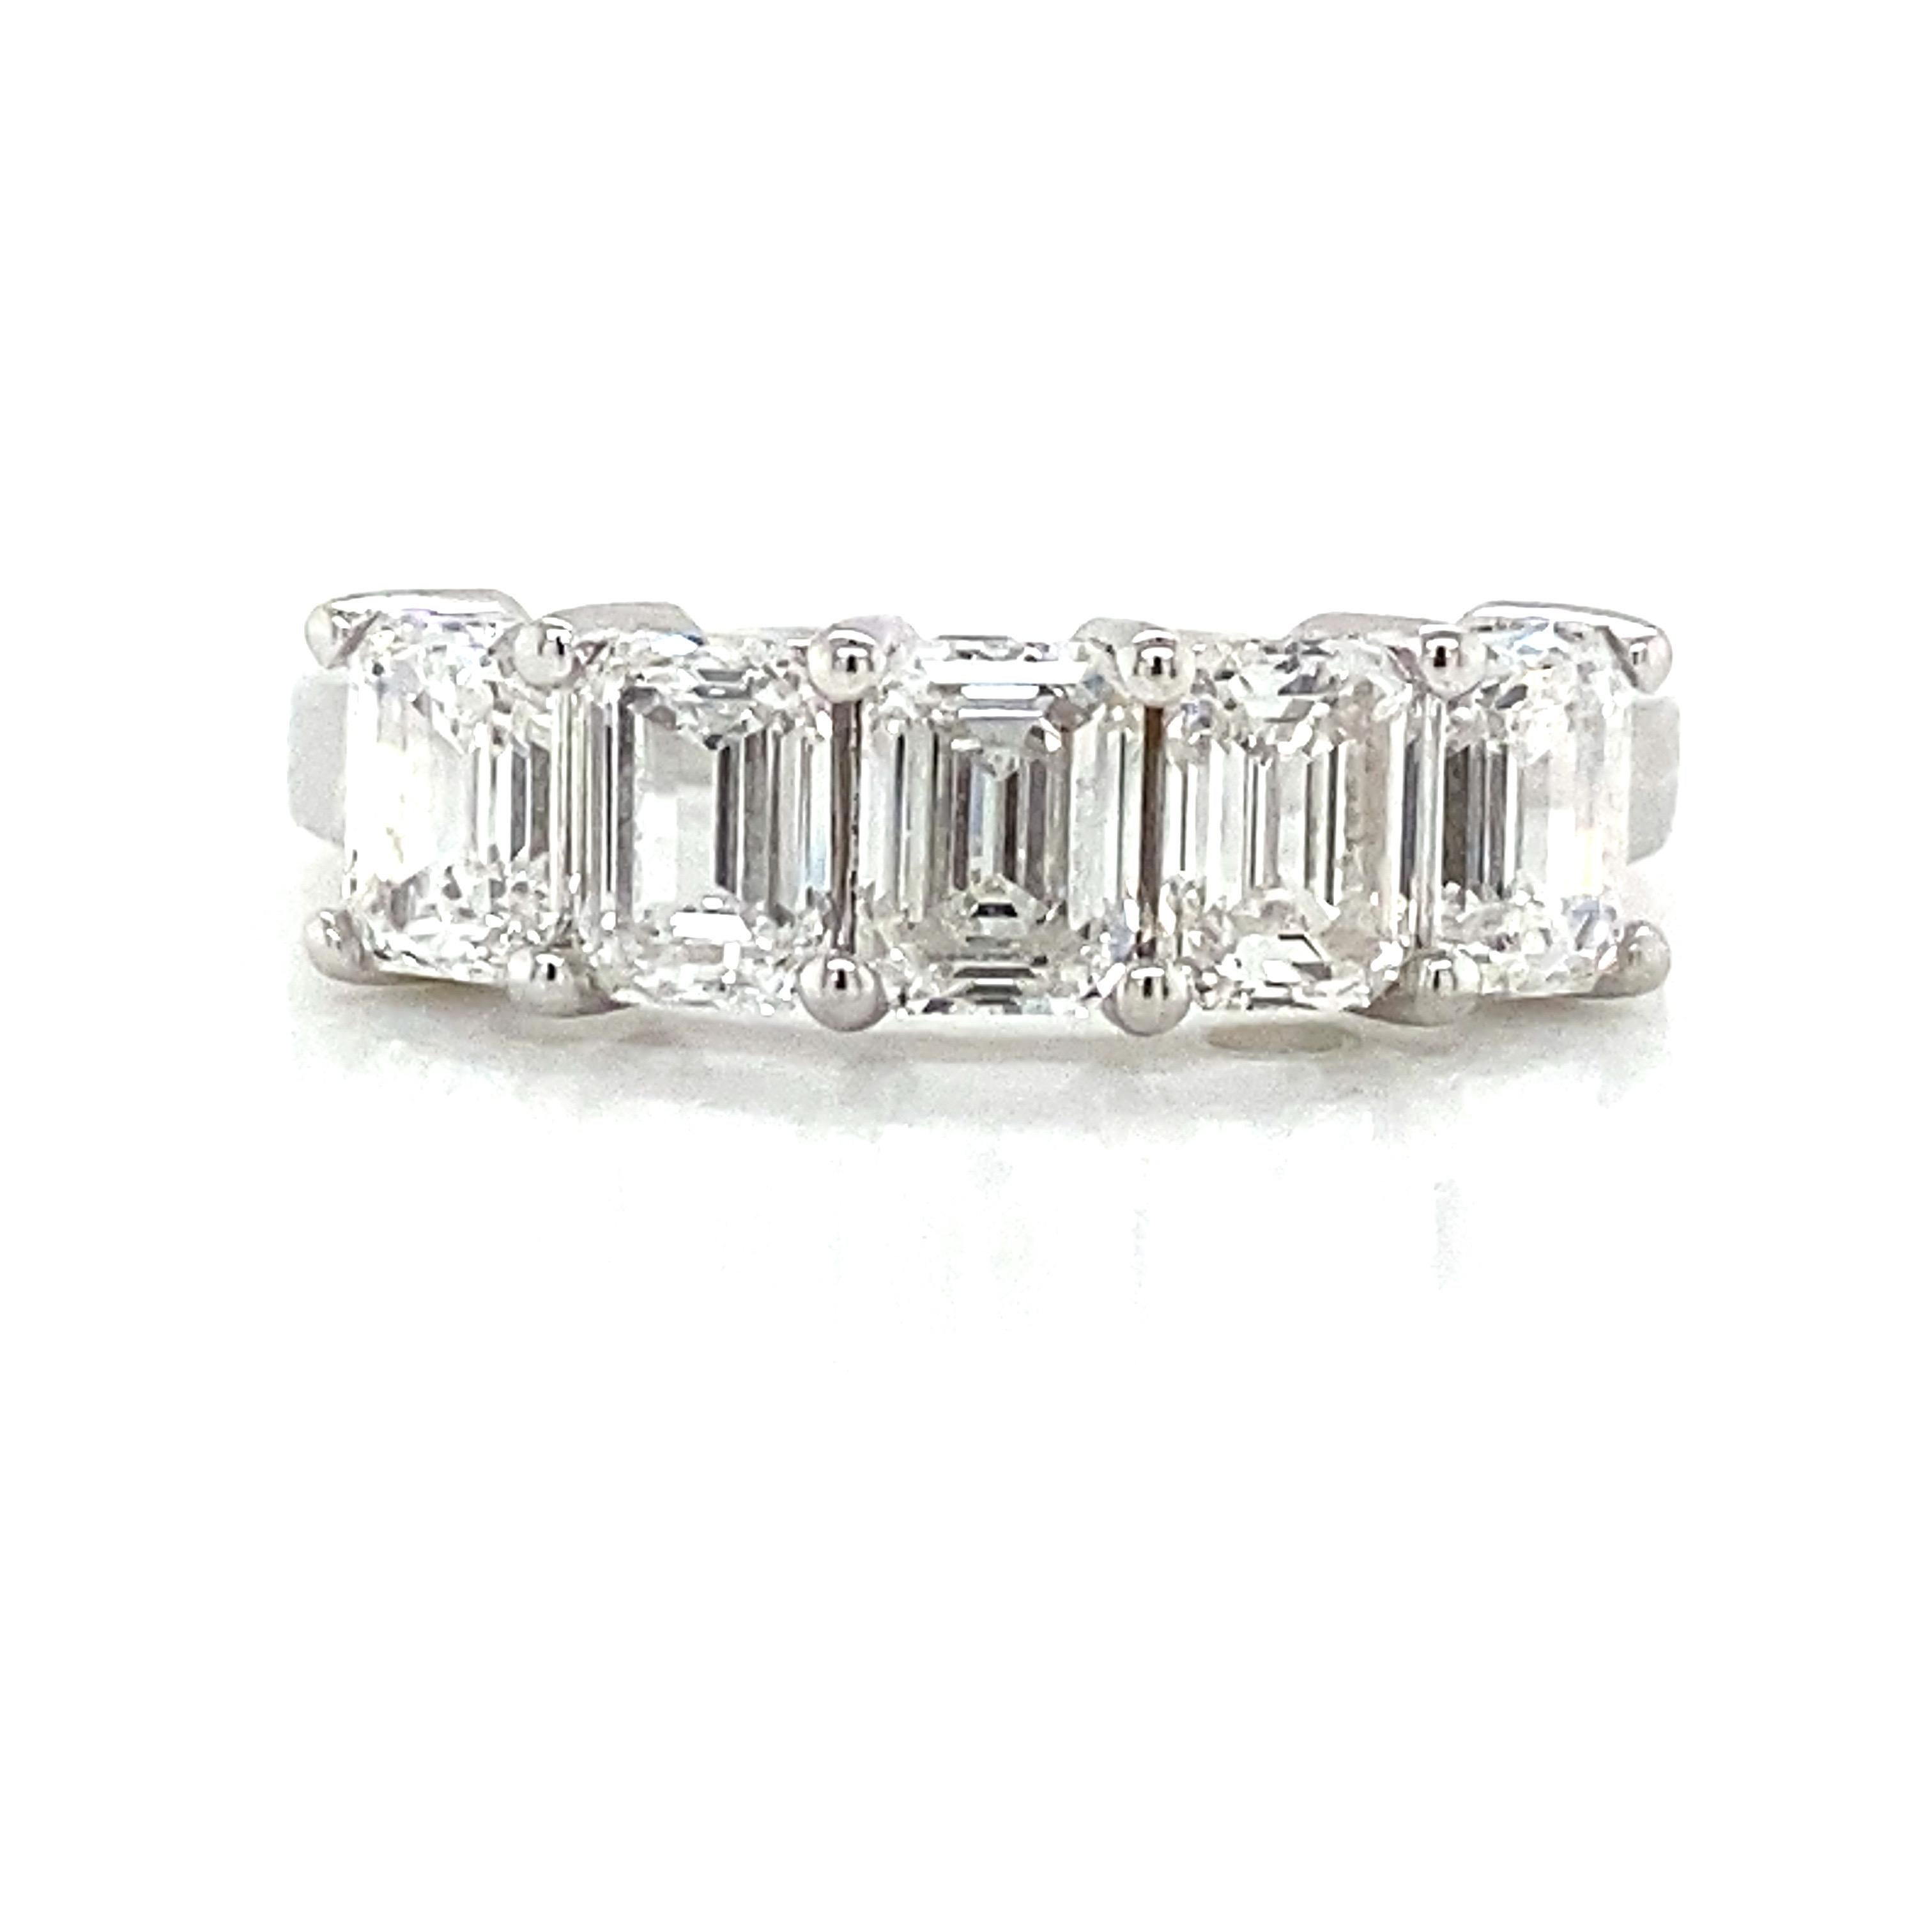 GIA Certified Emerald Diamond Band in 14K White Gold.  (5) GIA certified Emerald Cut Diamonds weighing 2.51 carat total weight, D-F in color and VS1-VS2 in clarity are expertly set.  The Ring measures 1/4 inch in width.  Ring size 7 3/4.  3.37